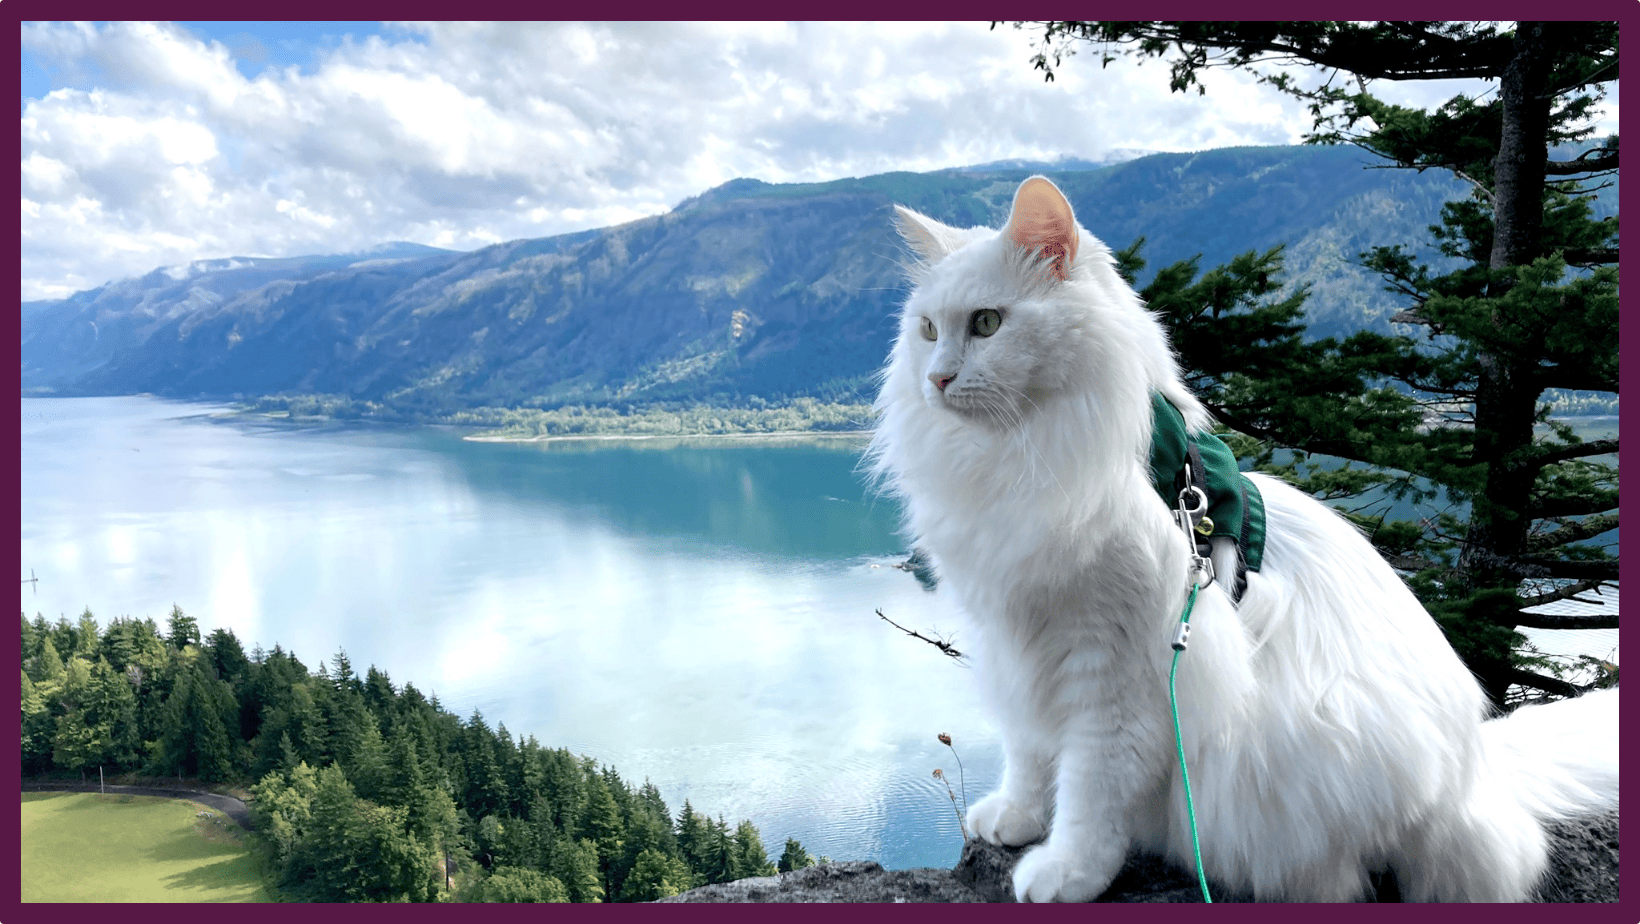 Rumi, long-haired white cat, sits in the foreground of a picturesque view of The Columbia River gorge with the river in the background.